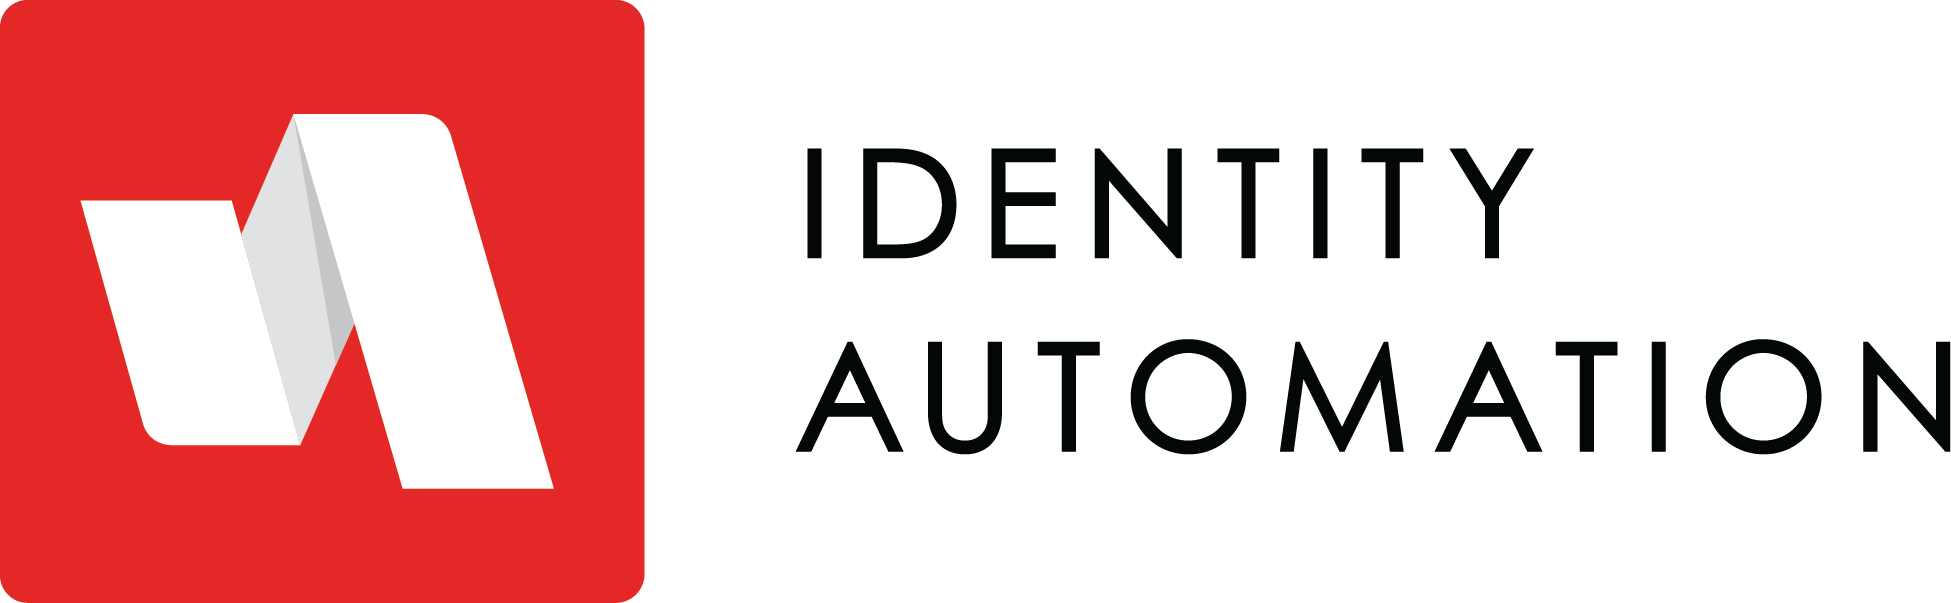 Identity Automation.png